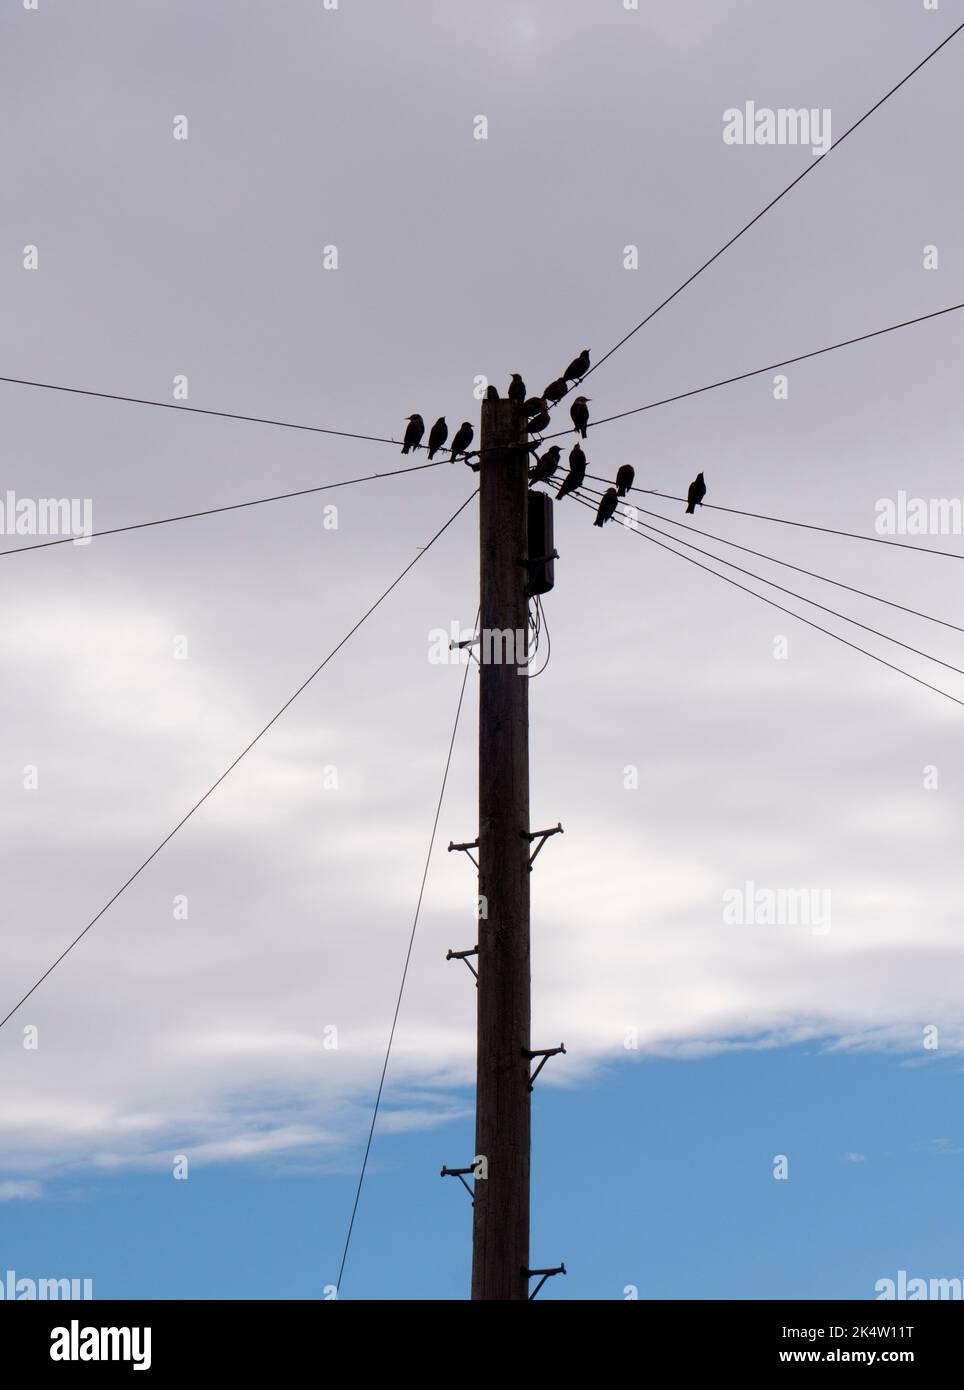 There is nothing more prosaic than a flock of birds - they look like starlings to me - perched on telephone wires. Yet, given the right lighting or dr Stock Photo